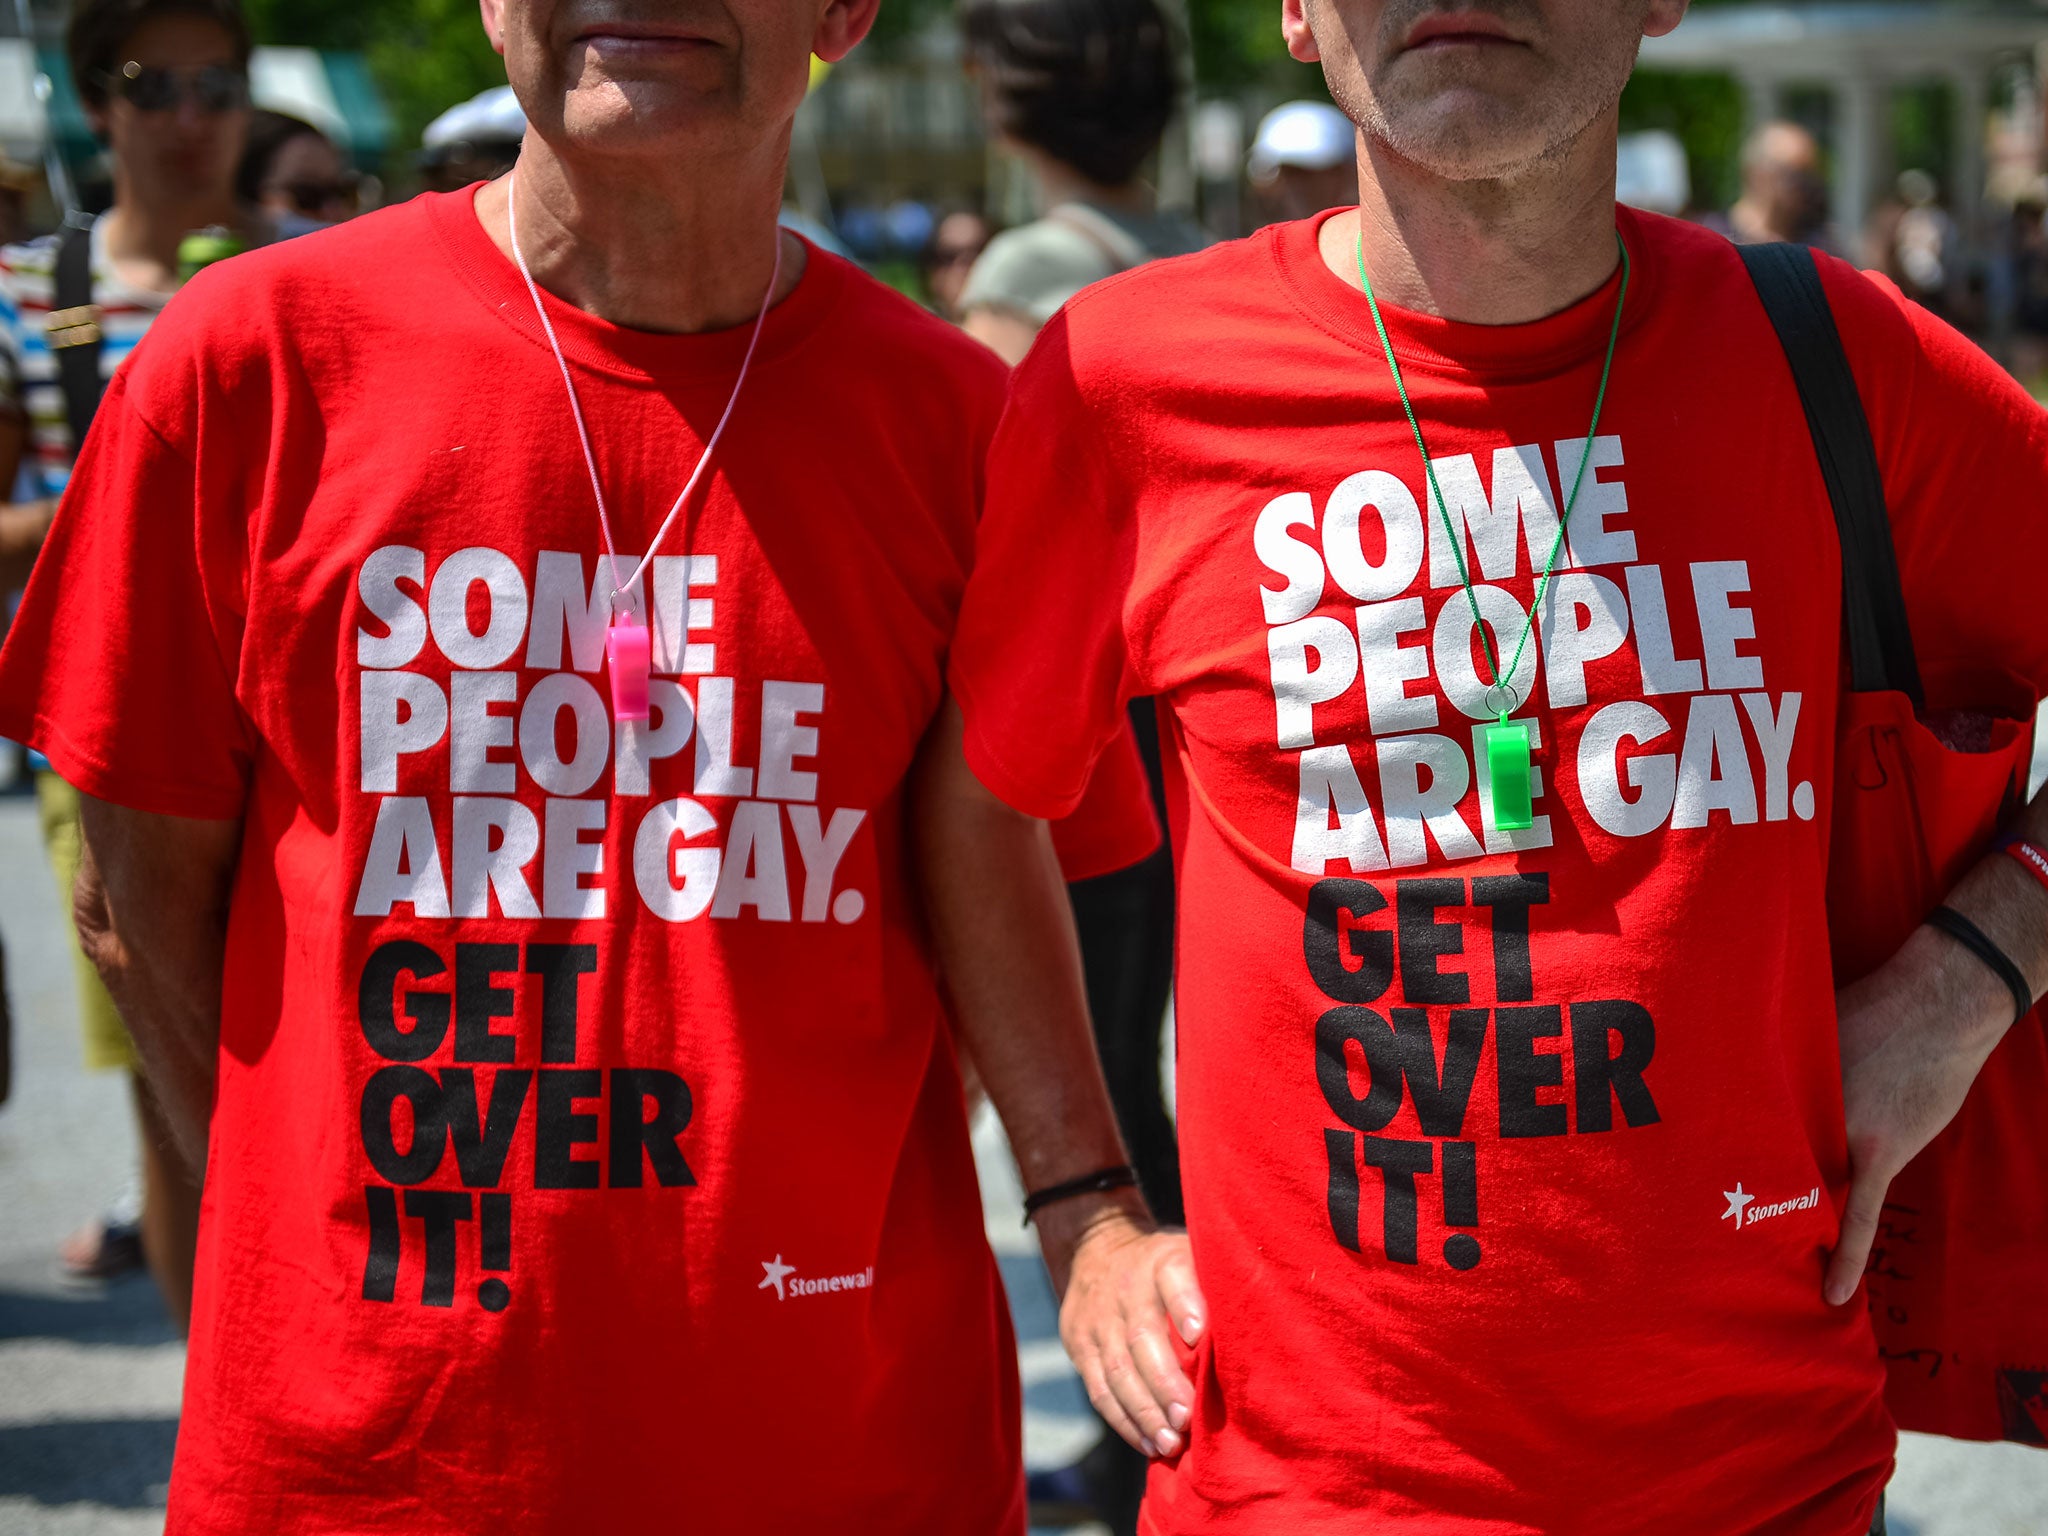 Two men wear tee shirts reading 'Some people are gay. Get over it!' during the Gay Pride Parade in Ljubljana, Slovenia, on June 15, 2013.